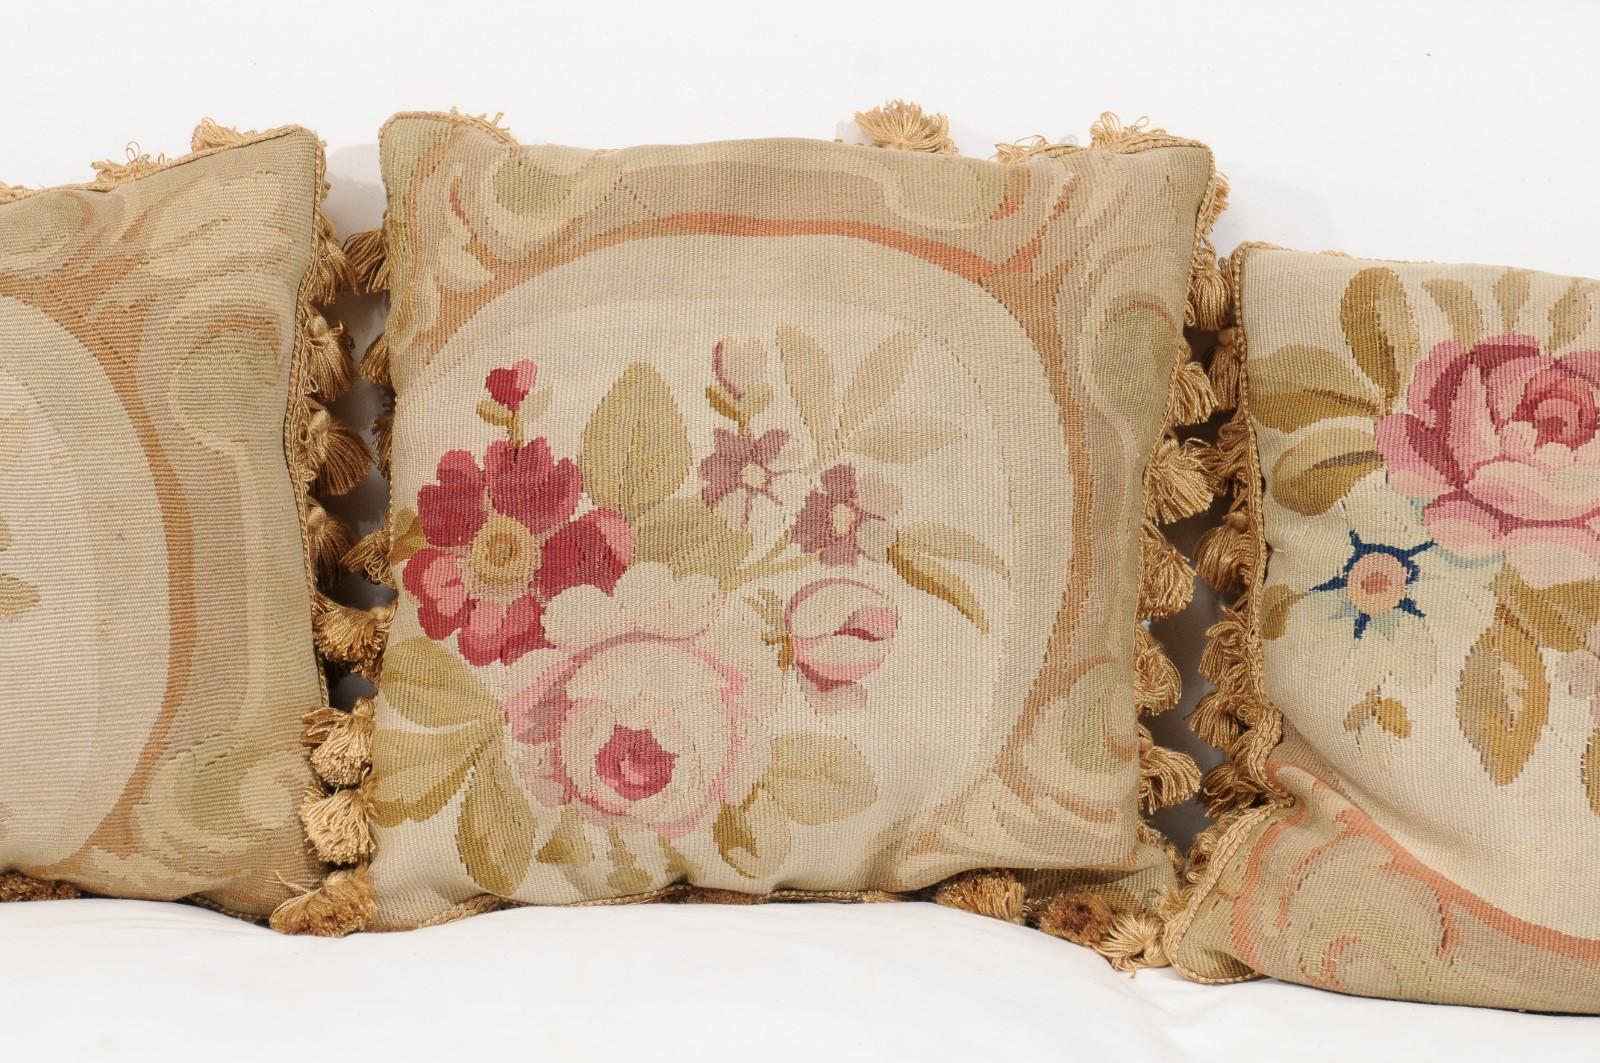 French 19th Century Aubusson Woven Tapestry Pillow with Roses and Tassels For Sale 2